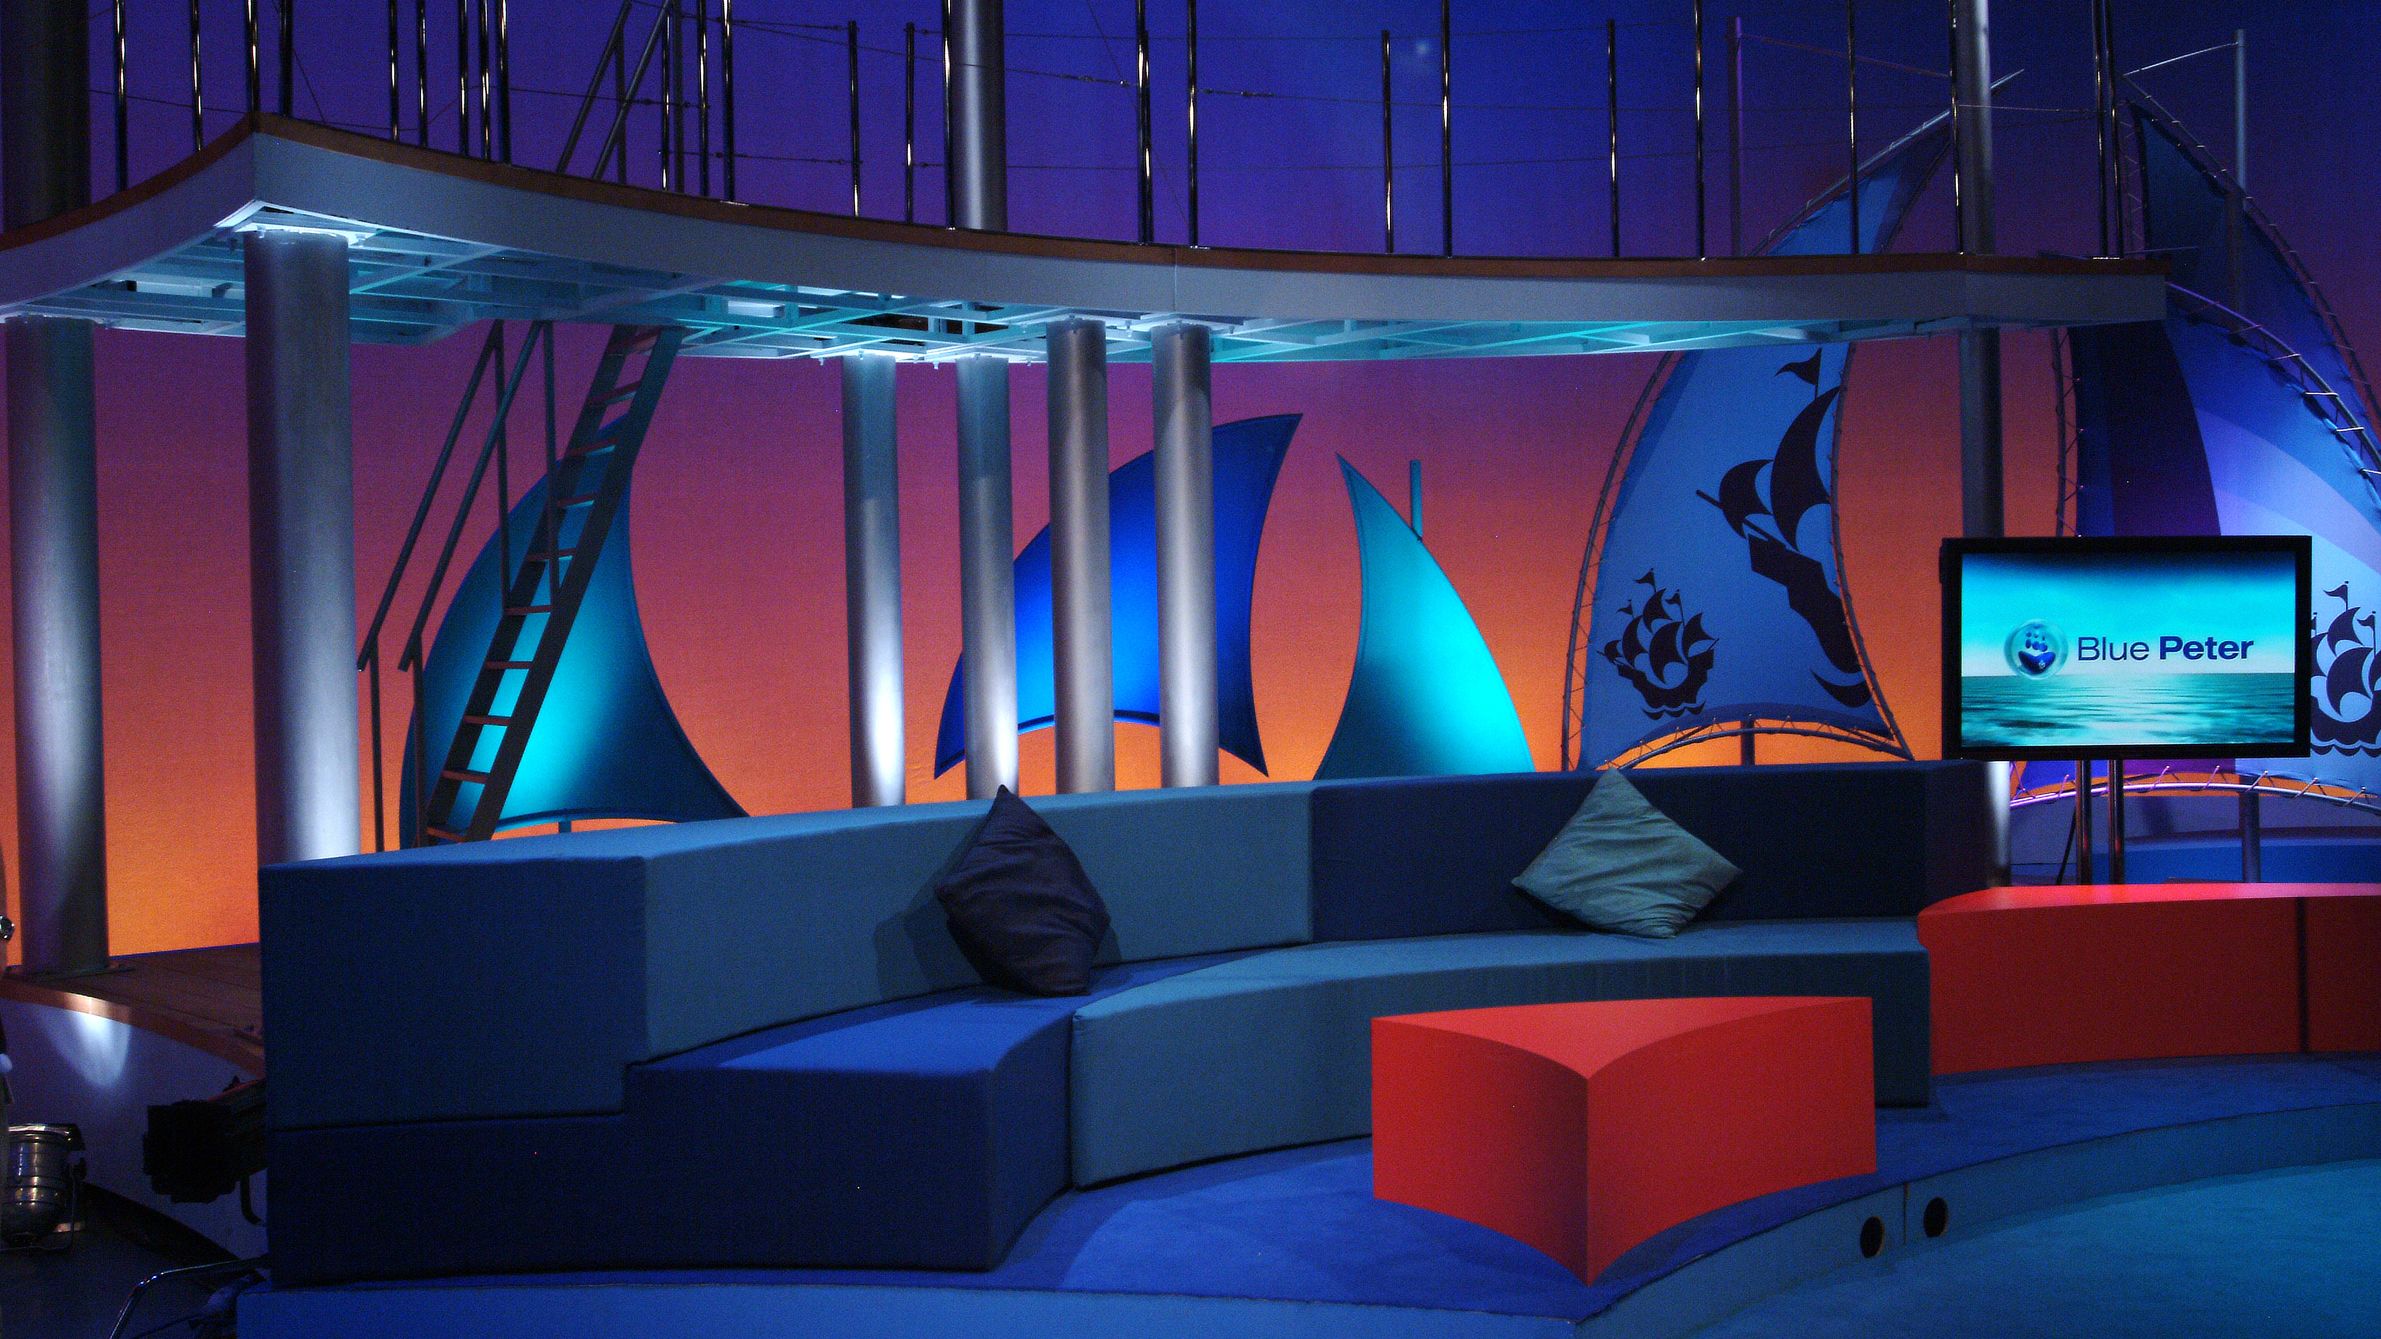 These empty BBC sets are monuments to some superb shows image 199